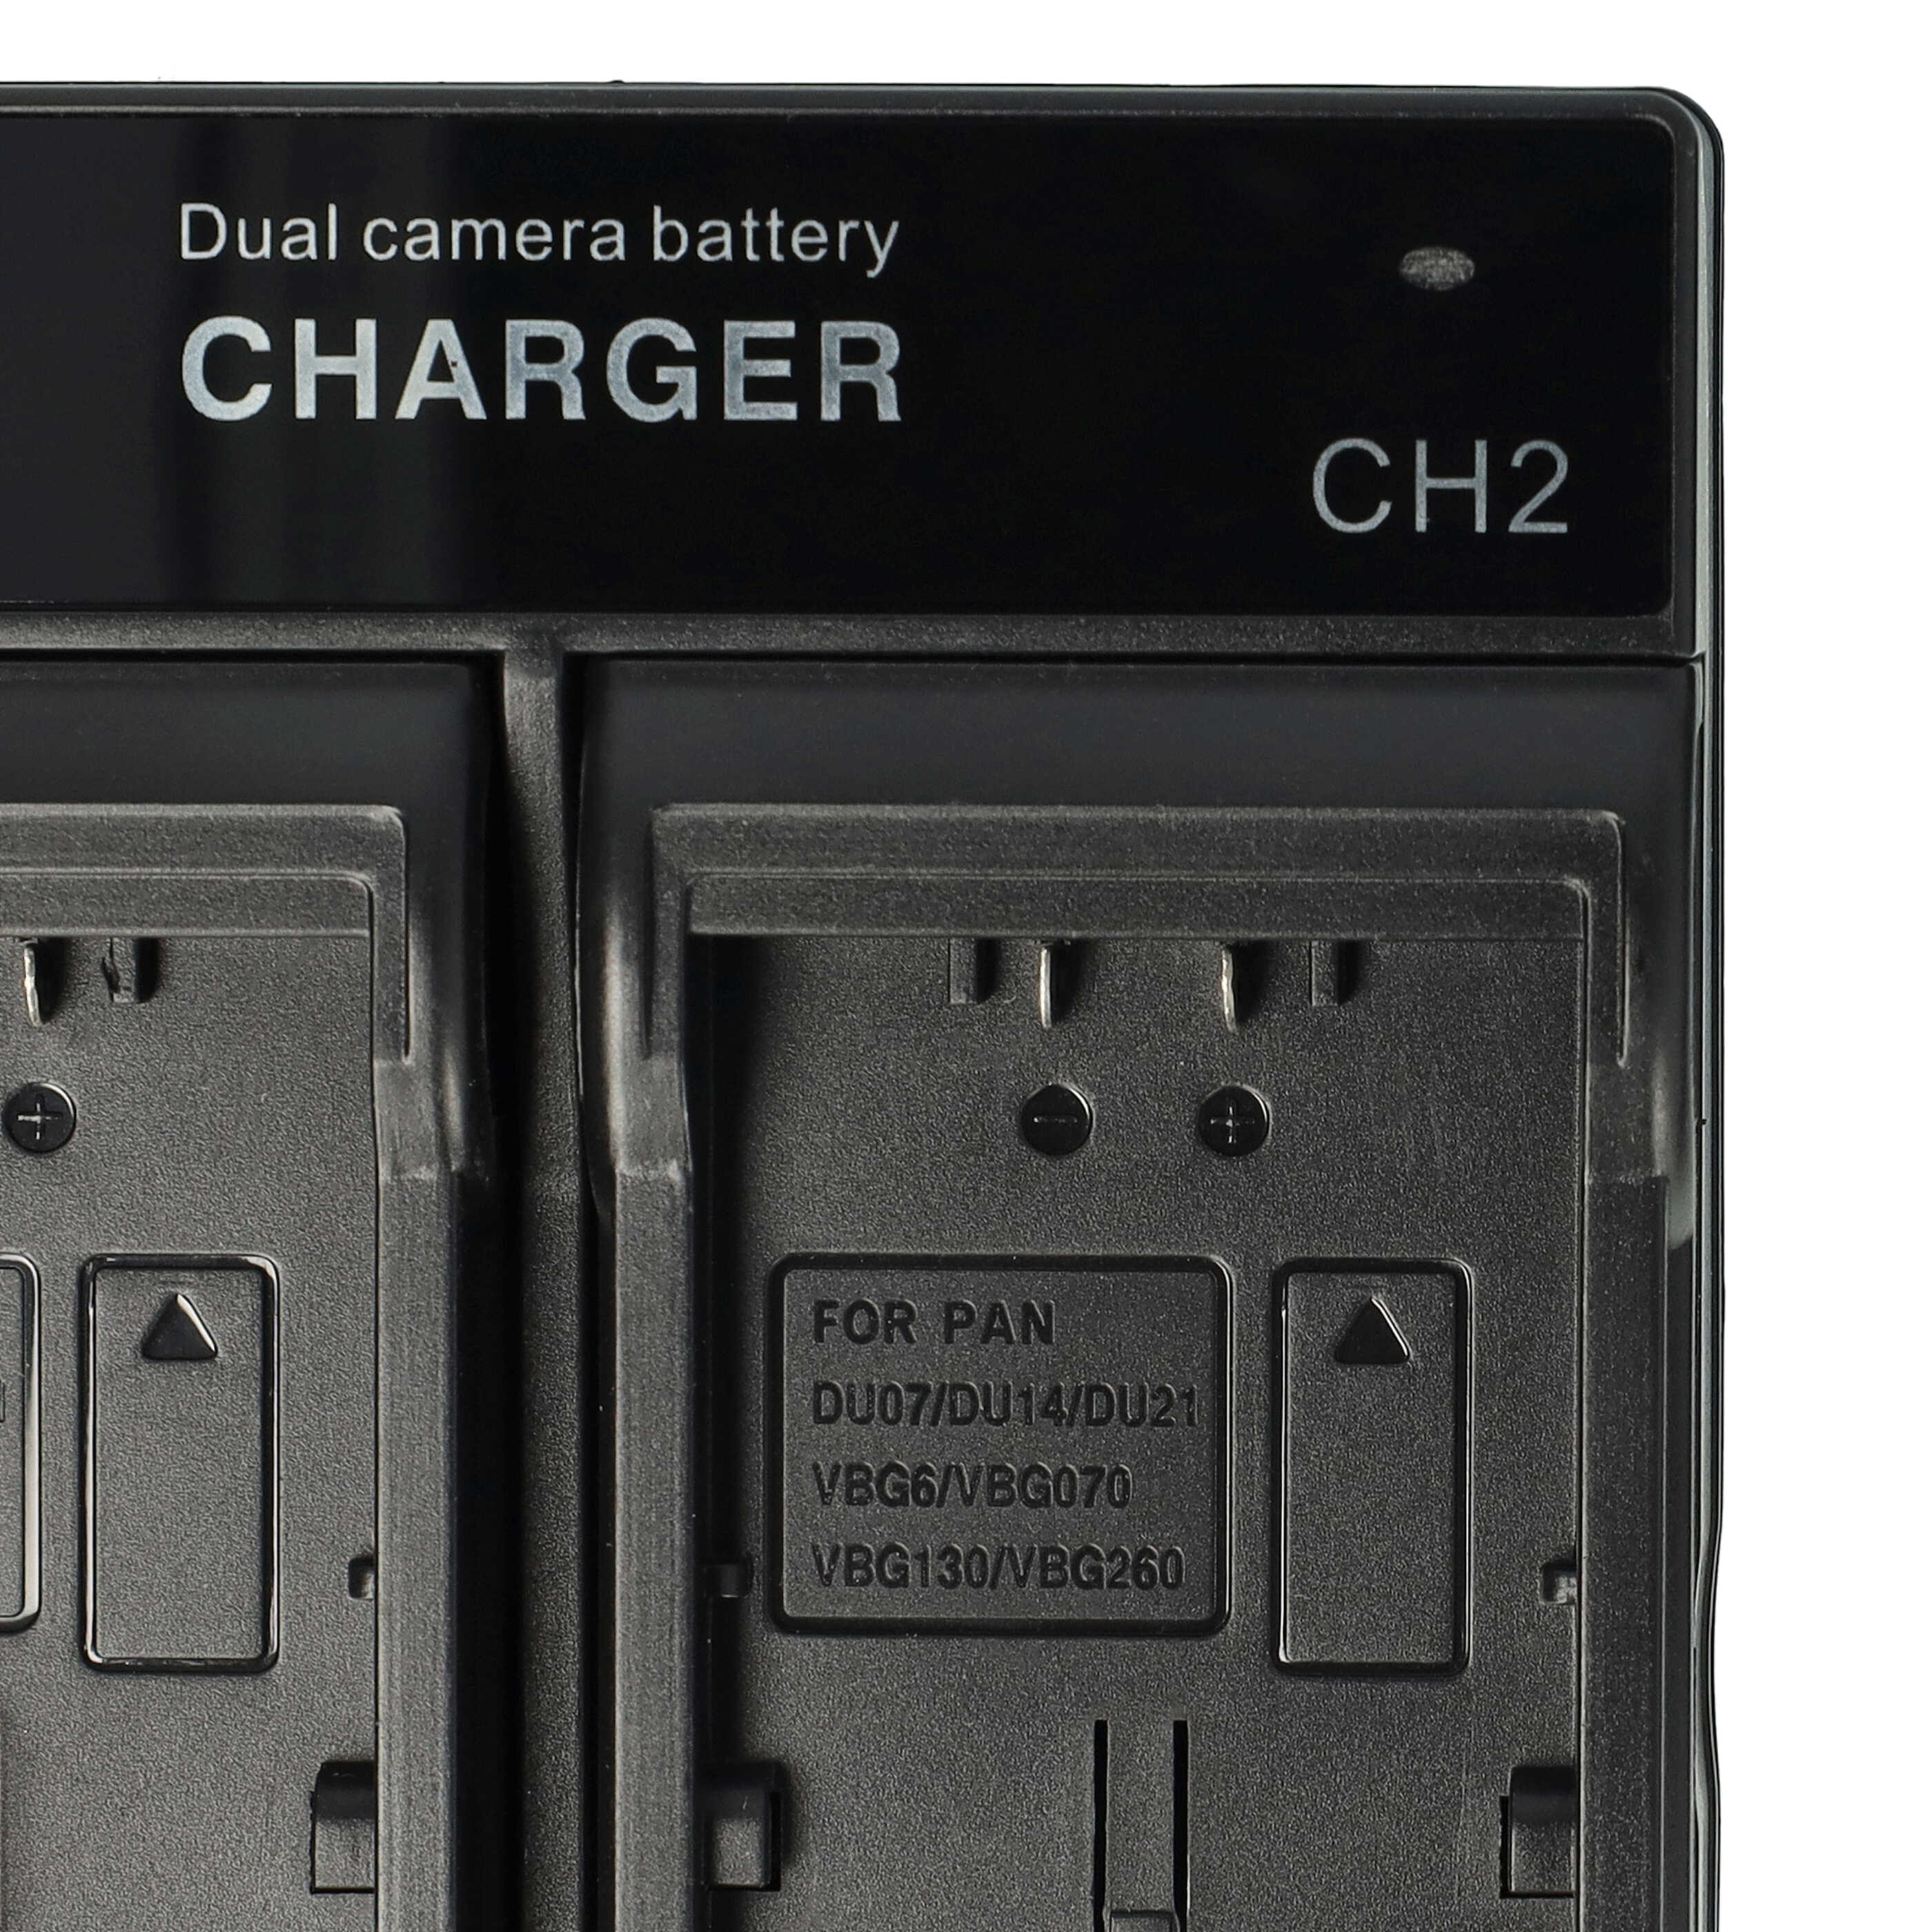 Battery Charger suitable for DZ-MV350A Camera etc. - 0.5 / 0.9 A, 4.2/8.4 V